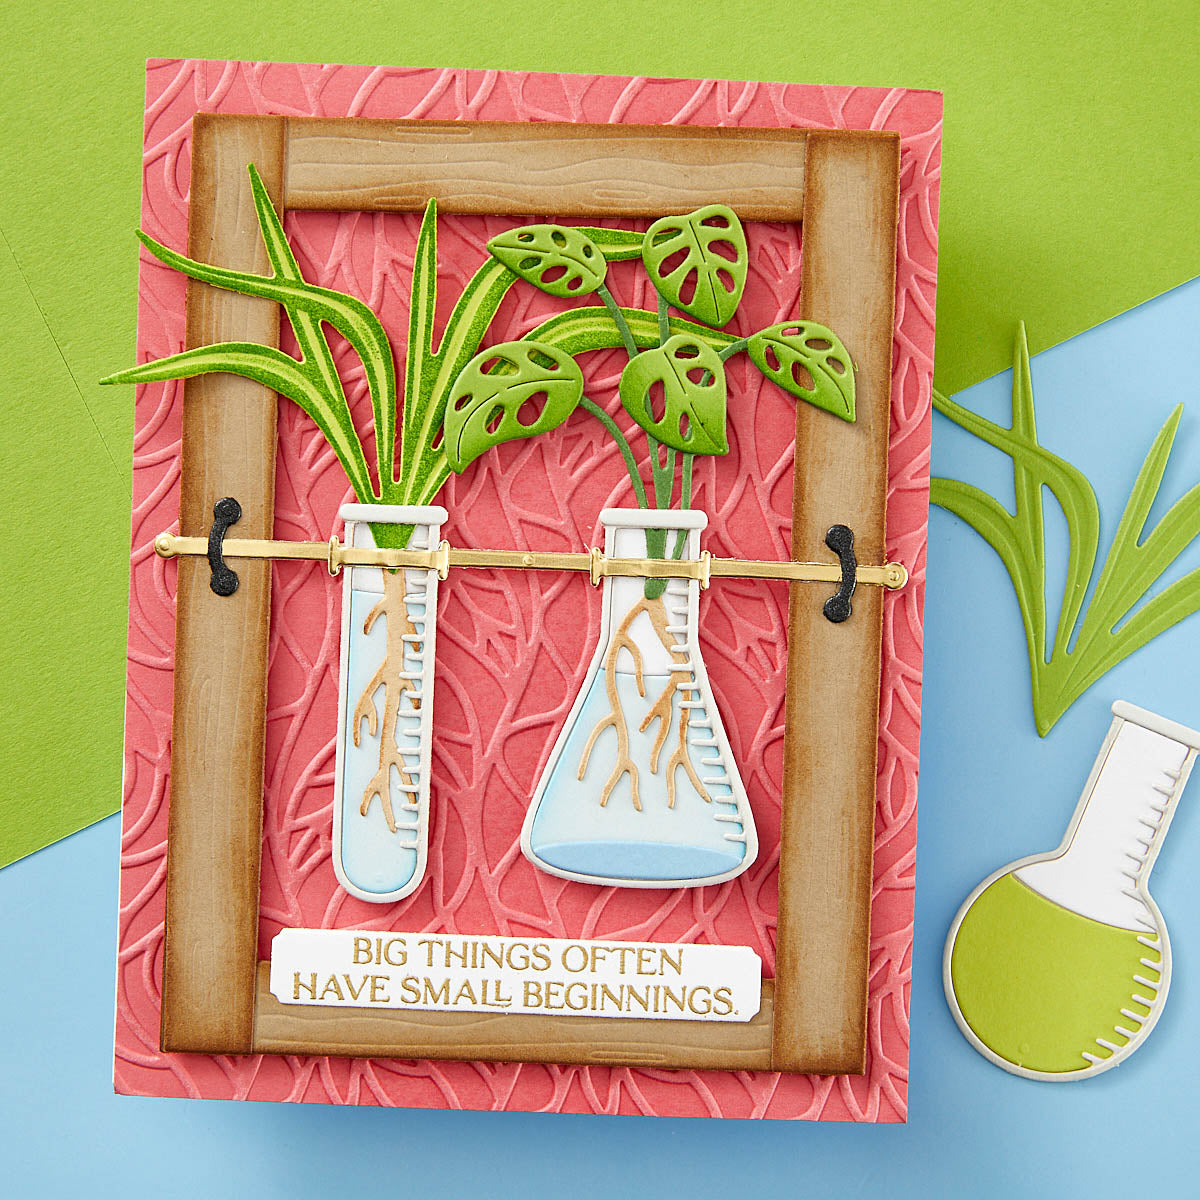 Spellbinders - Propagation Garden Frames Etched Dies from the Propagation Garden Collection by Annie Williams